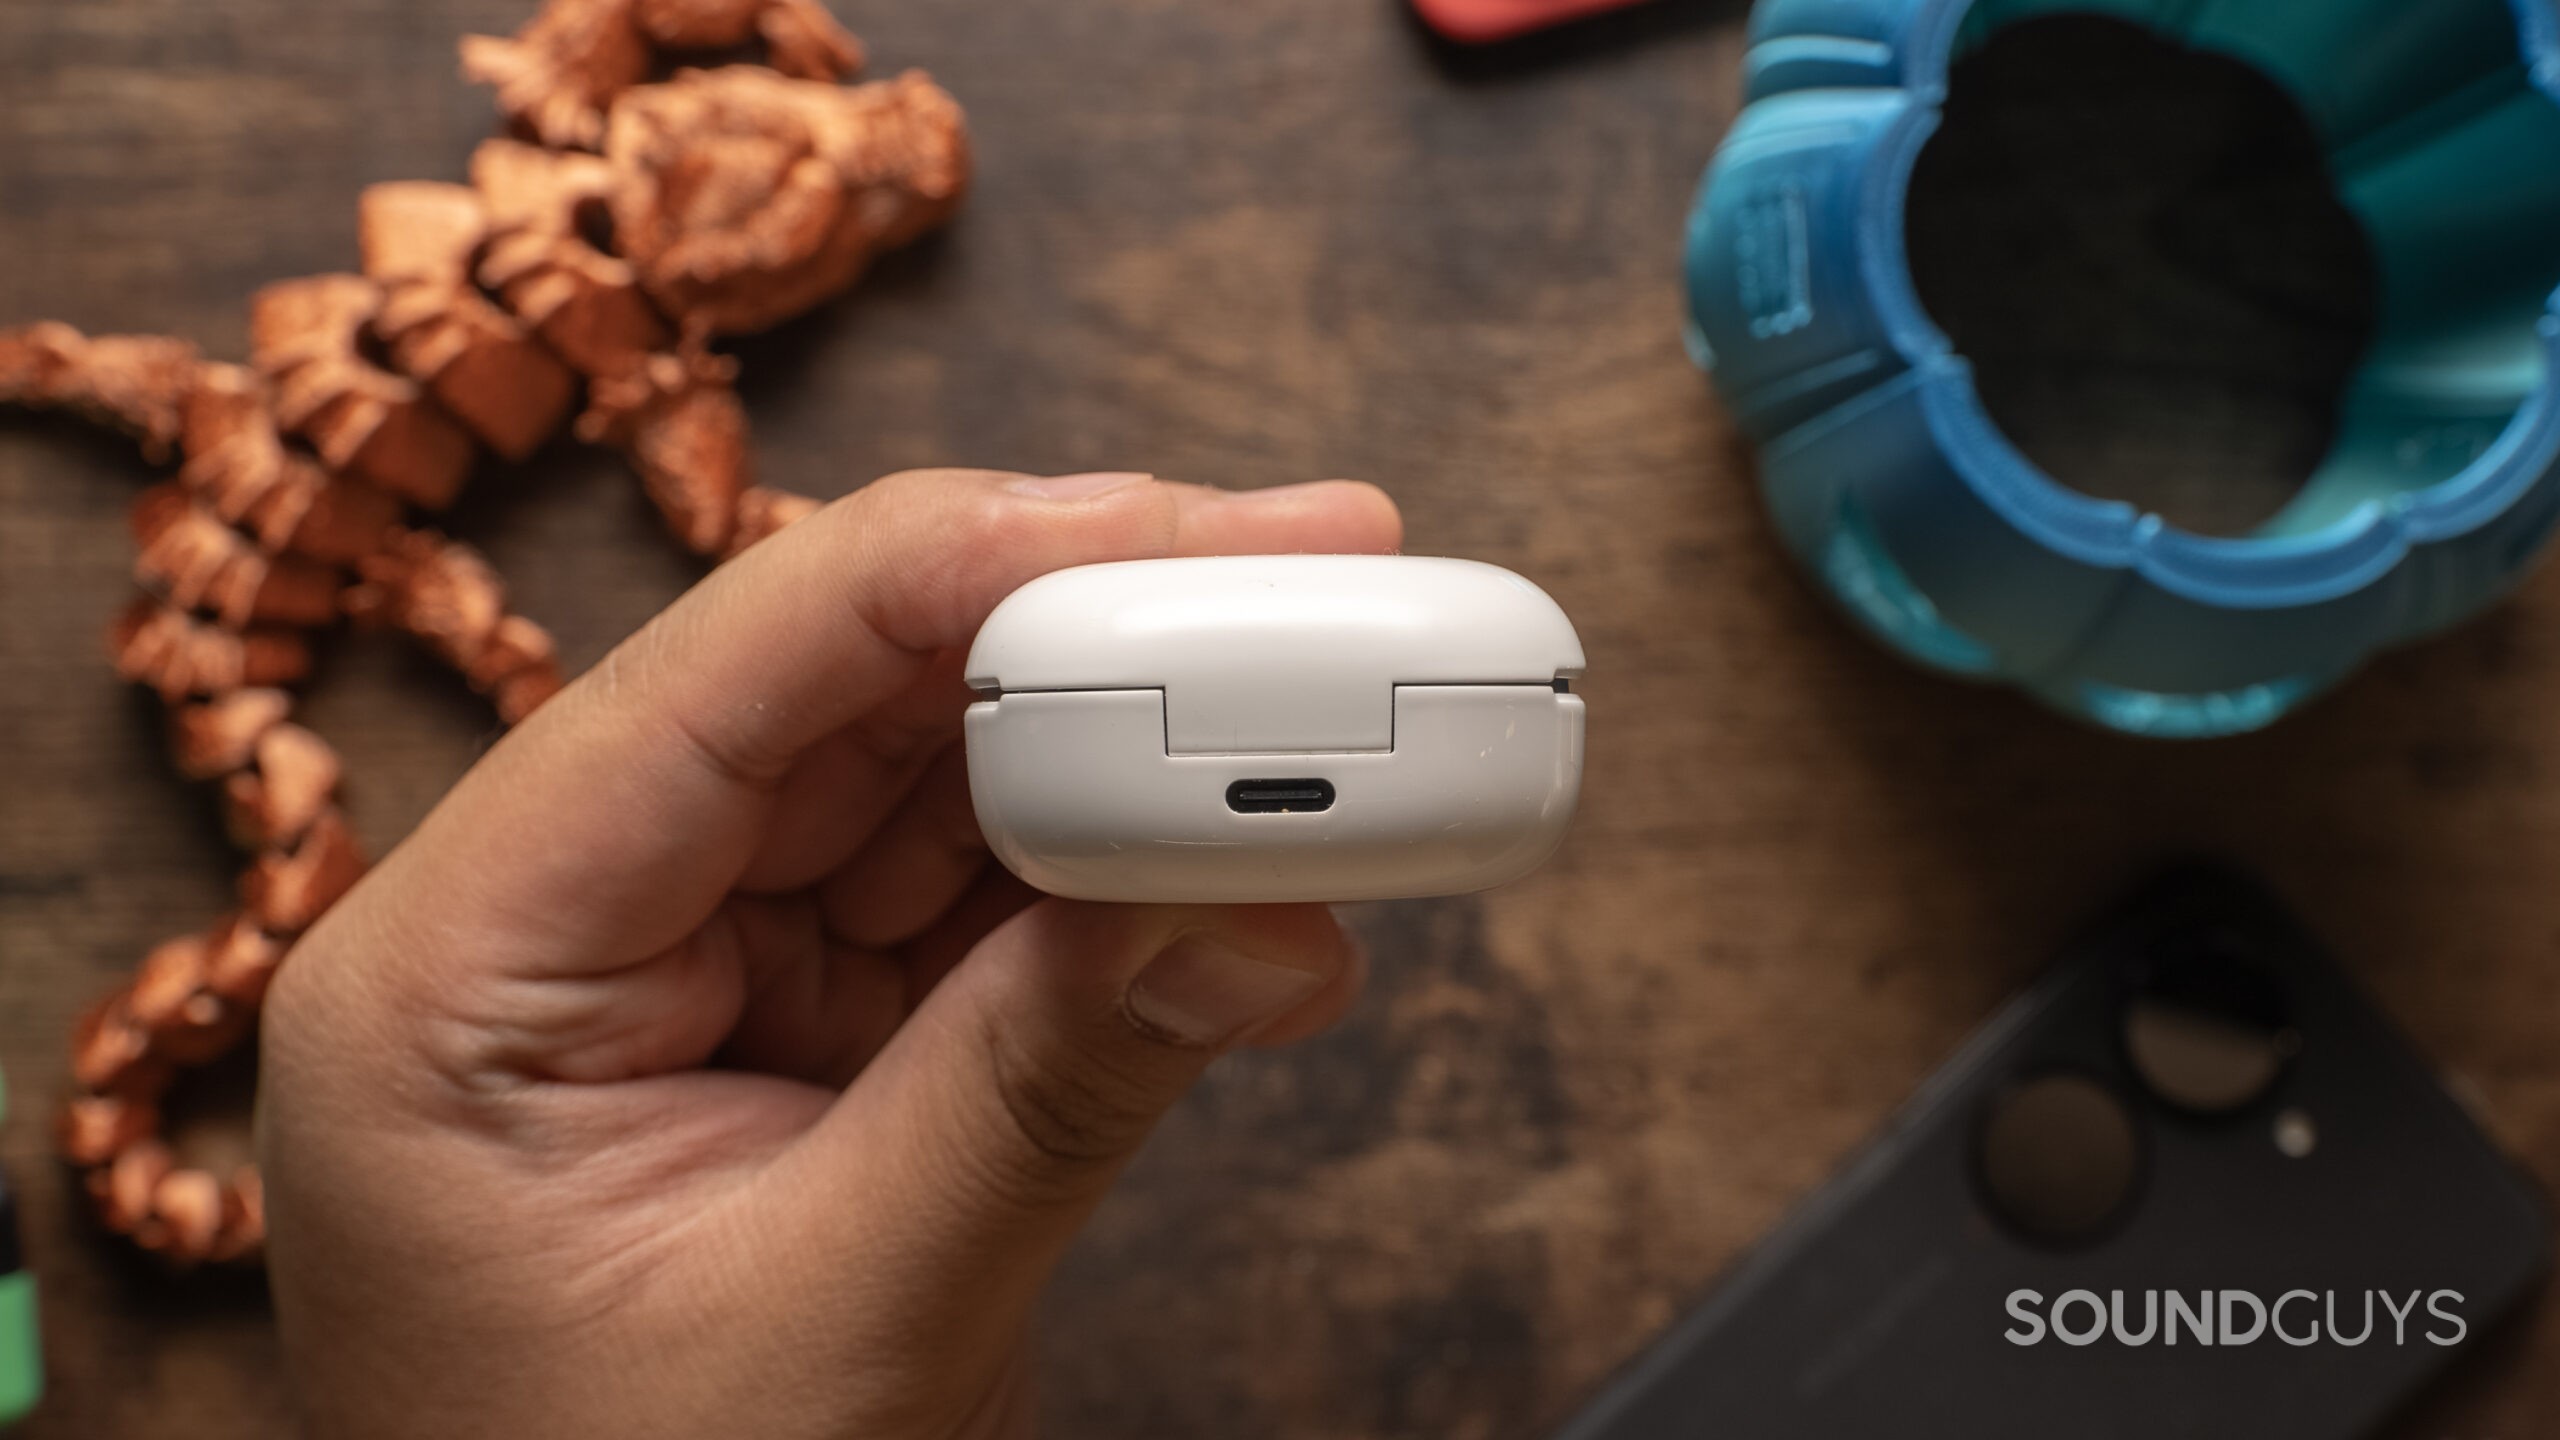 The USB-C charging port of the Samsung Galaxy Buds FE.